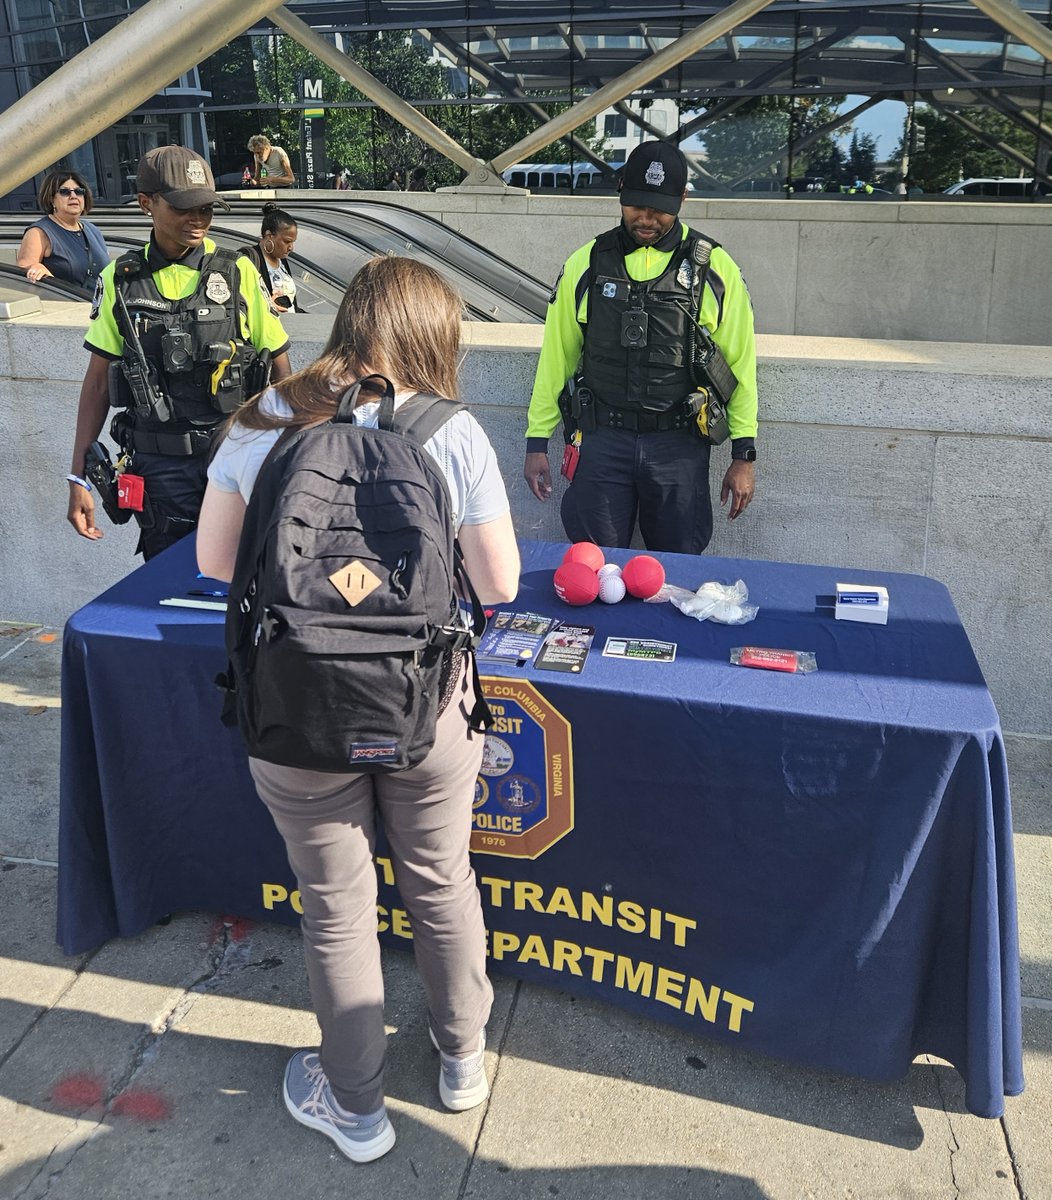 MTPD is in the community and on the Metro transit system daily. Officers consistently work to ensure safety and relay critical information to Metro customers